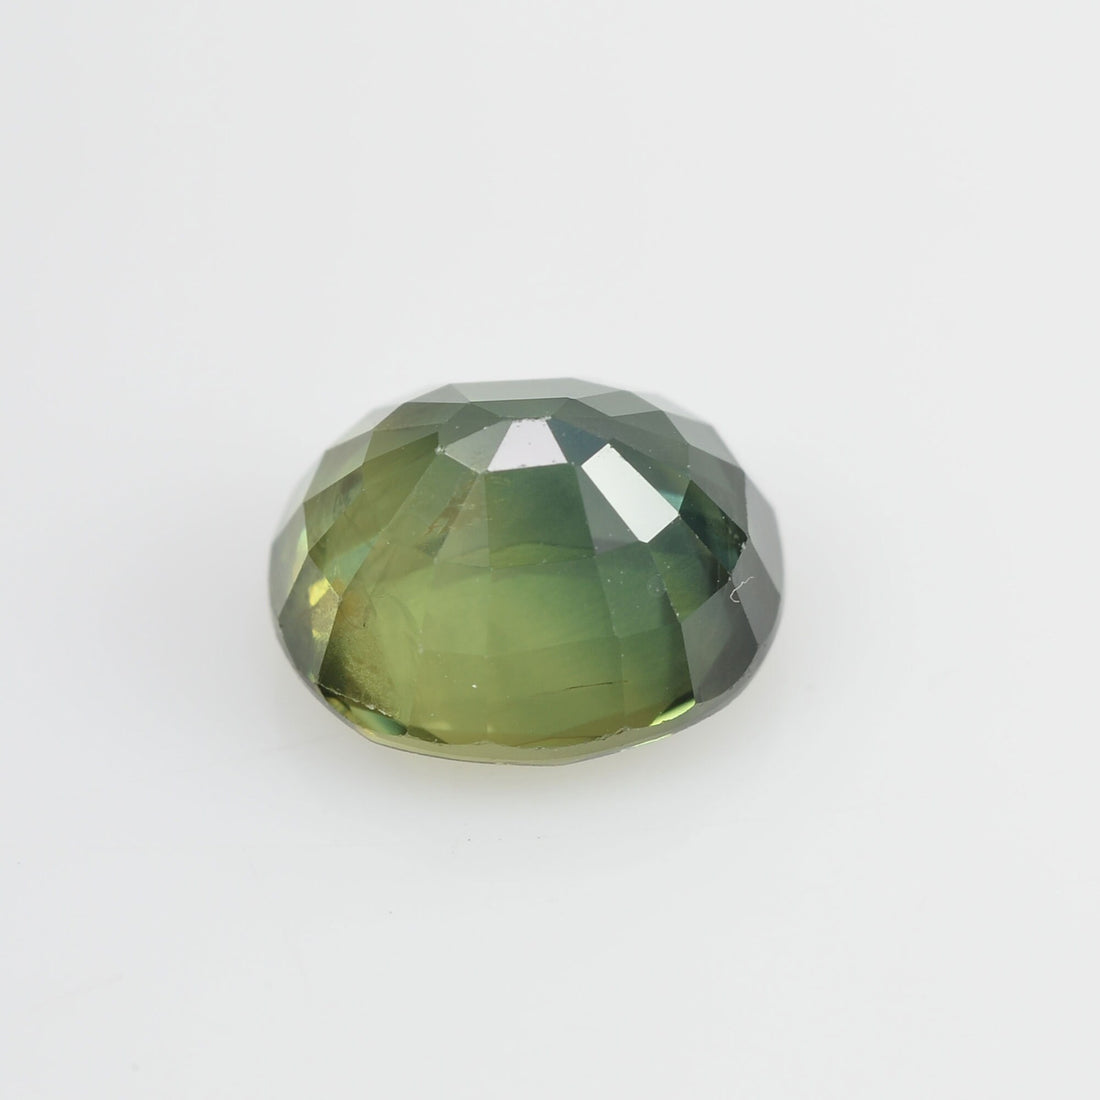 3.38 cts Natural Green Sapphire Loose Gemstone Oval Cut